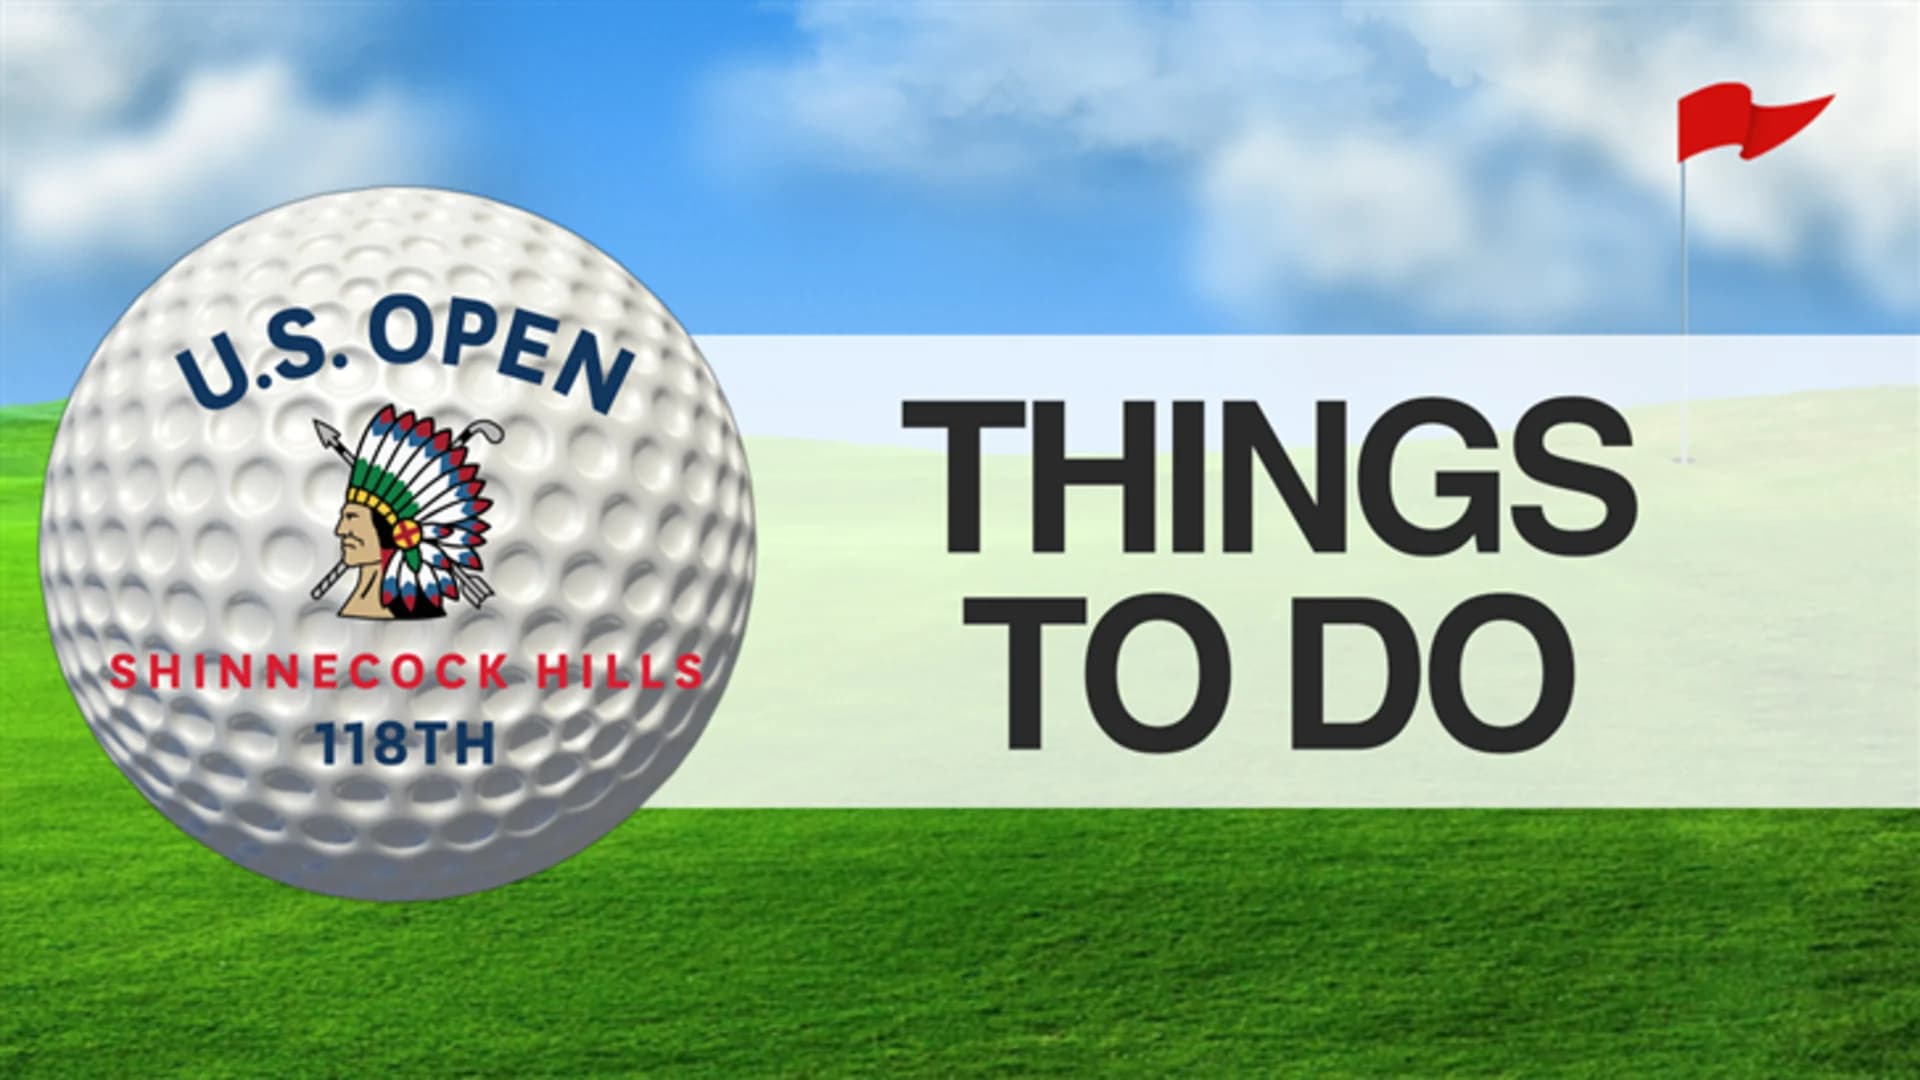 Things To Do Around the U.S. Open